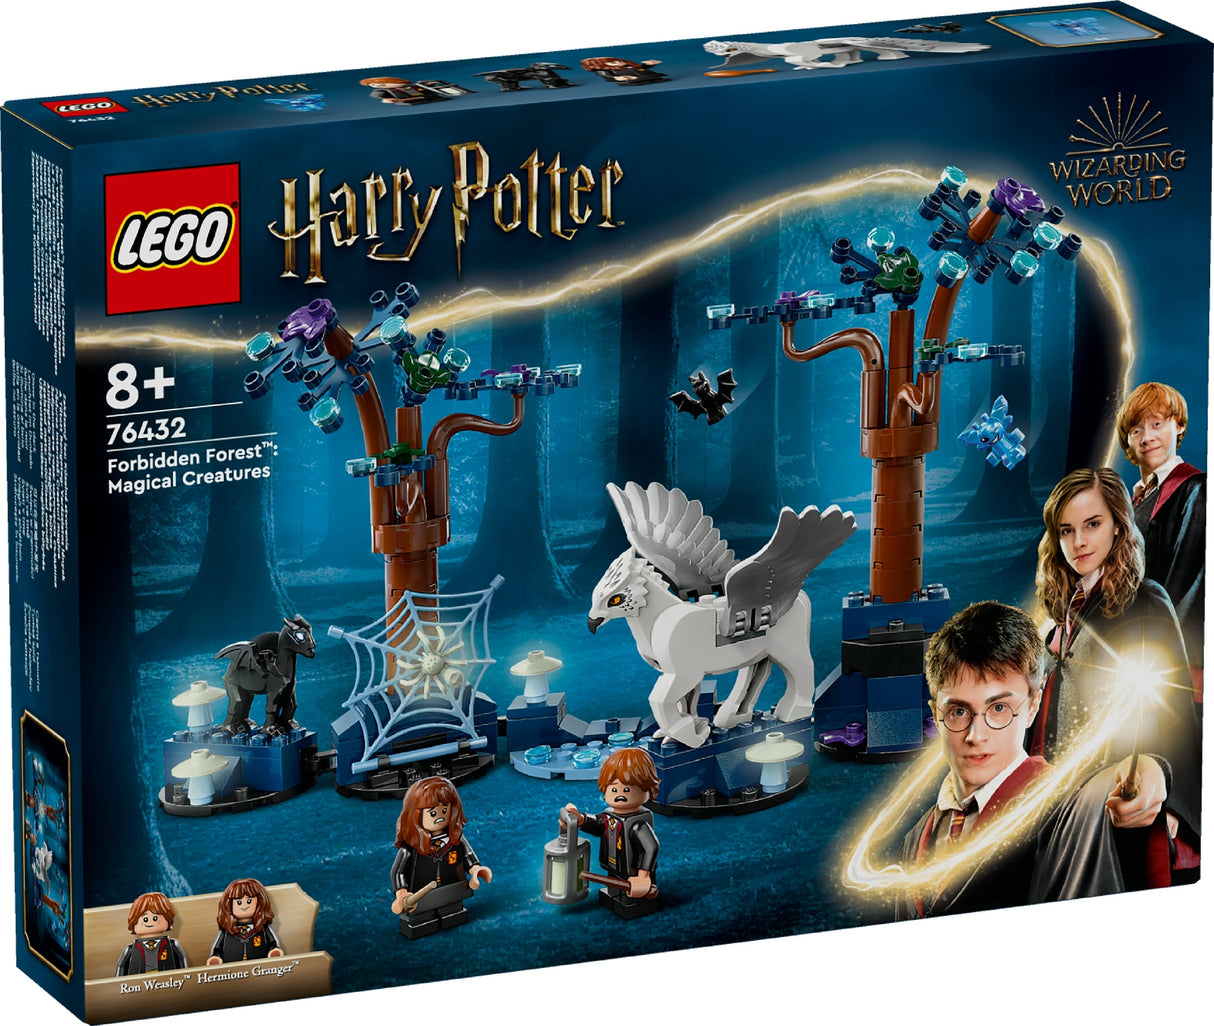 LEGO HARRY POTTER FORBIDDEN FOREST: MAGICAL CREATURES 76432 AGE: 8+